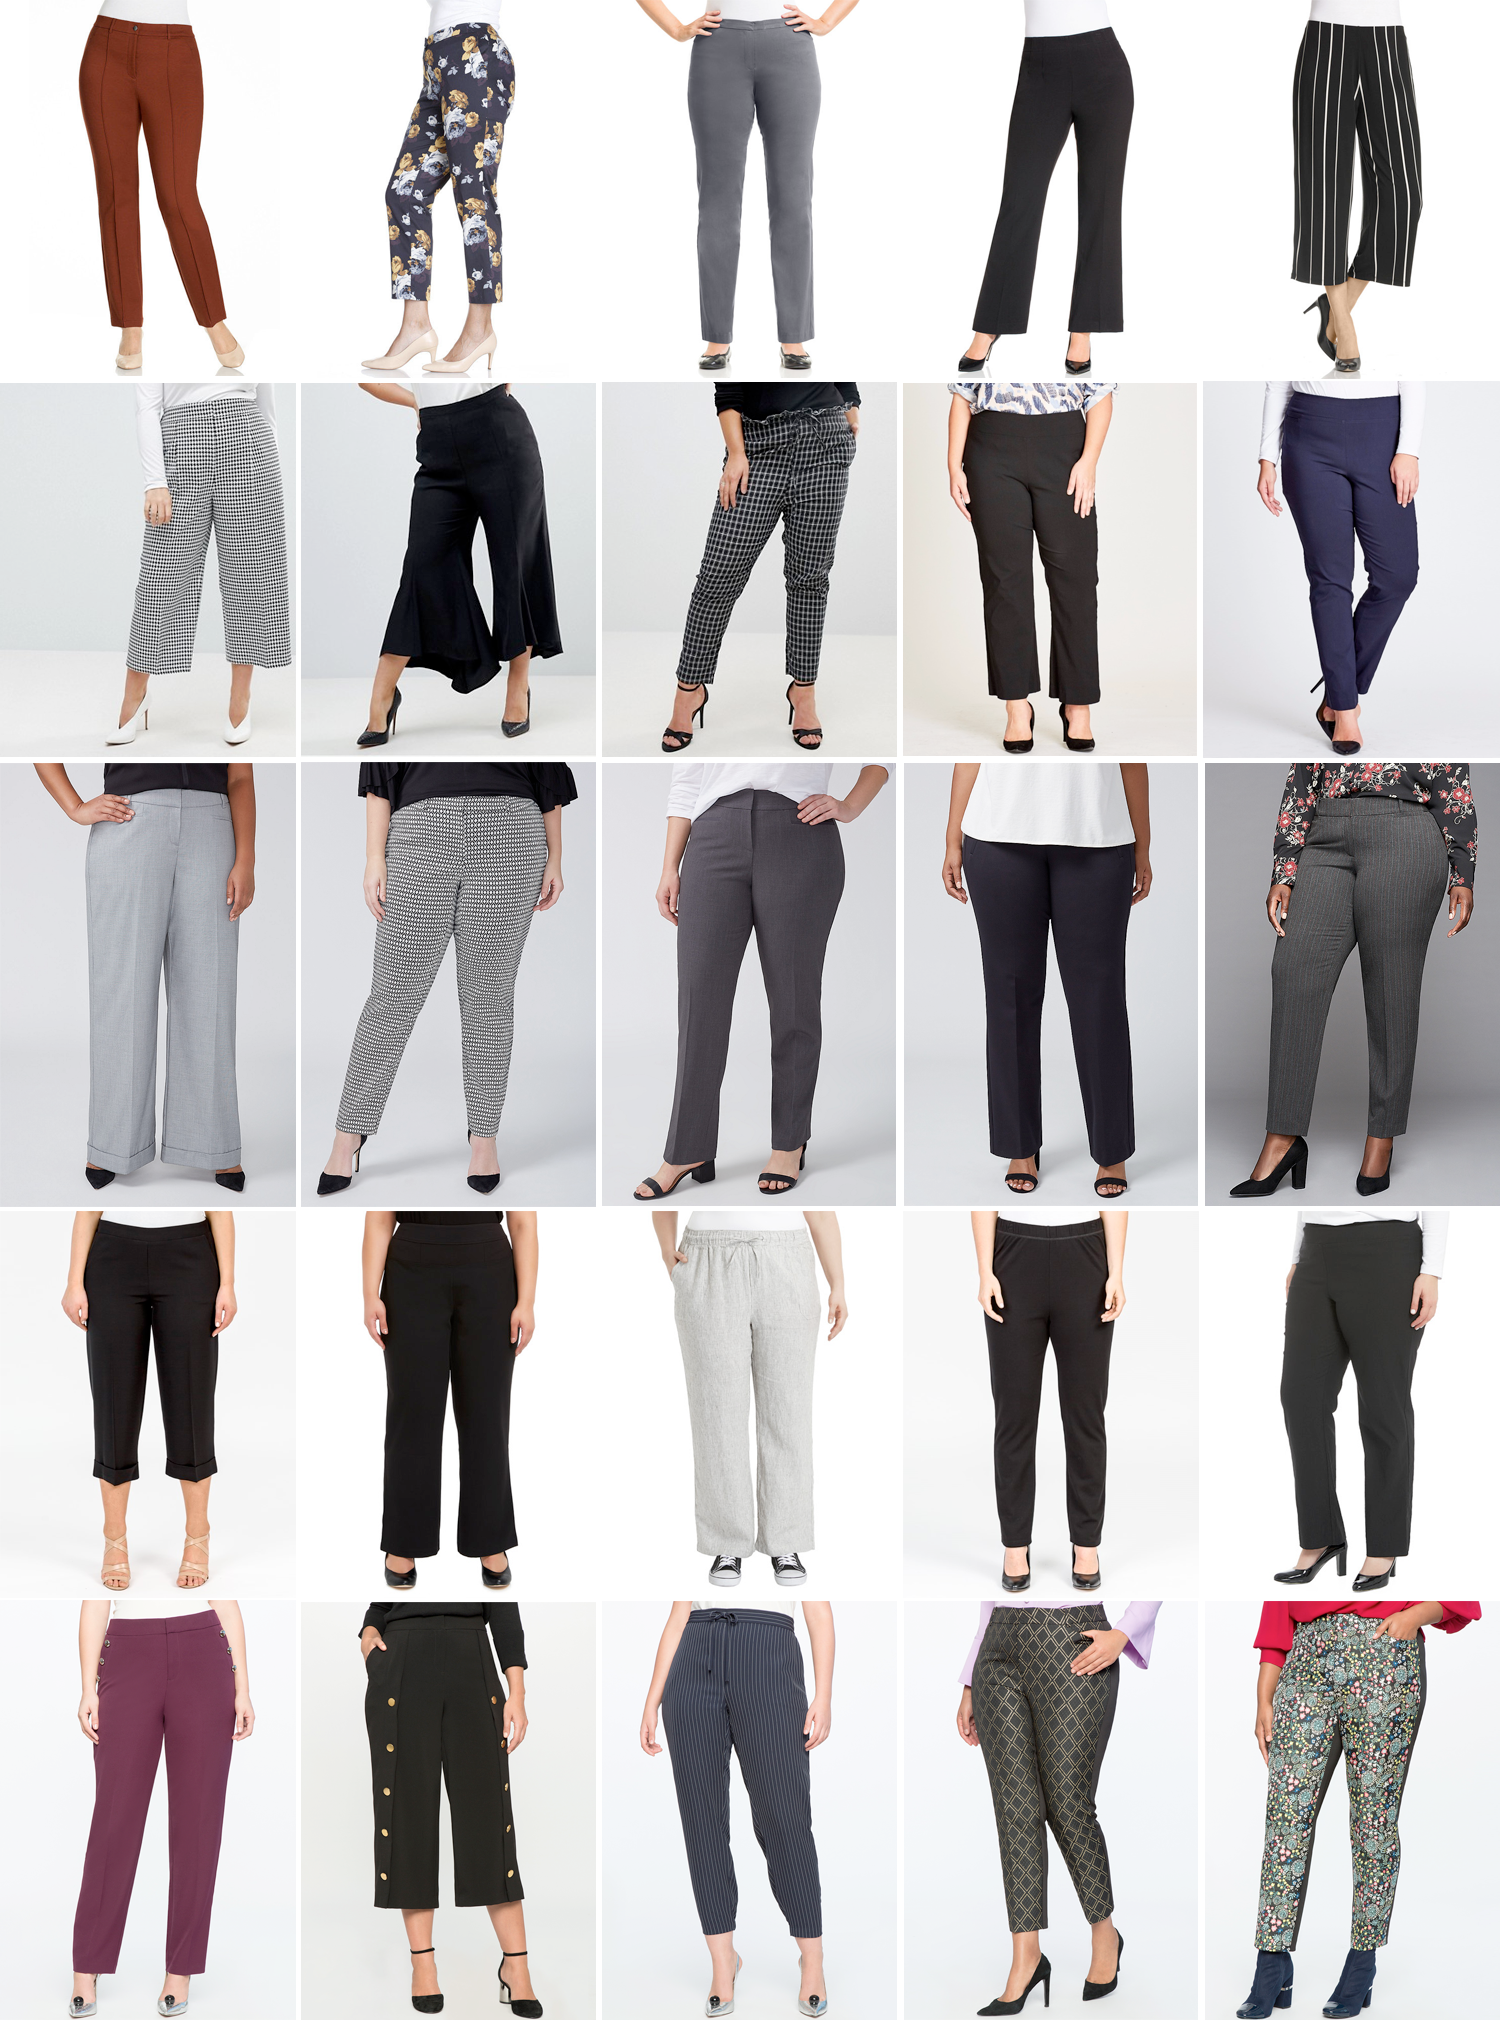 Plus size workwear trousers // Row 1 L-R: Sara So Slimming Stretch Pant, $39.00 from EziBuy; Sara Cotton Sateen Stretch Pant, $45.00 from EziBuy; Sara Bengaline Long Zip Pant, $59.99 from EziBuy; Sara Workwear Pant, $69.99 from EziBuy; Sara Dry Knit Culotte, $79.99 from EziBuy. Row 2 L-R: ASOS CURVE Tailored Dogtooth Longer Length Culotte, $87.41 from ASOS; ASOS CURVE Tailored Soft Fluted Pant, $76.48 from ASOS; Fashion Union Plus Check Pants With Paperbag Waist, $69.93 from ASOS; Super Stretch Kick-Flare Pant, $44.99 from Autograph; Super Stretch Pant; $44.99 from Autograph. Row 2 L-R: Allie Tailored Stretch Wide Leg Pant, USD $69.95 from Lane Bryant; Allie Ankle Pant, USD $69.95 from Lane Bryant; Lena Tailored Stretch Straight Leg Pant with T3 Technology, USD $44.99 from Lane Bryant; Ponte Trouser Pant, USD $59.95 from Lane Bryant; Striped Ankle Pant by GLAMOUR X LANE BRYANT, USD $49.99 from Lane Bryant. Row 4 L-R: Wide Leg Marina Pant, $109.90 from K&K; Wild Child Formal Pull-On Pant, $79.99 from Farmers; Wild Child Linen Wide Leg Stripe Pant, $99.99 from Farmers; Pull On Ponte Pant, $89.90 from K&K; Yourself Luxe Essential Full Length Pant, $69.99 from Farmers. Row 5 L-R: Button Detail Straight Leg Pant, USD $84.90 from Eloquii; Wide Leg Button Culottes, USD $89.90 from Eloquii; Pinstripe Trouser, USD $89.90 from Eloquii; Kady Fit Brocade Pant, USD $94.90 from Eloquii; Kady Fit Floral Brocade Pant, USD $94.90 from Eloquii